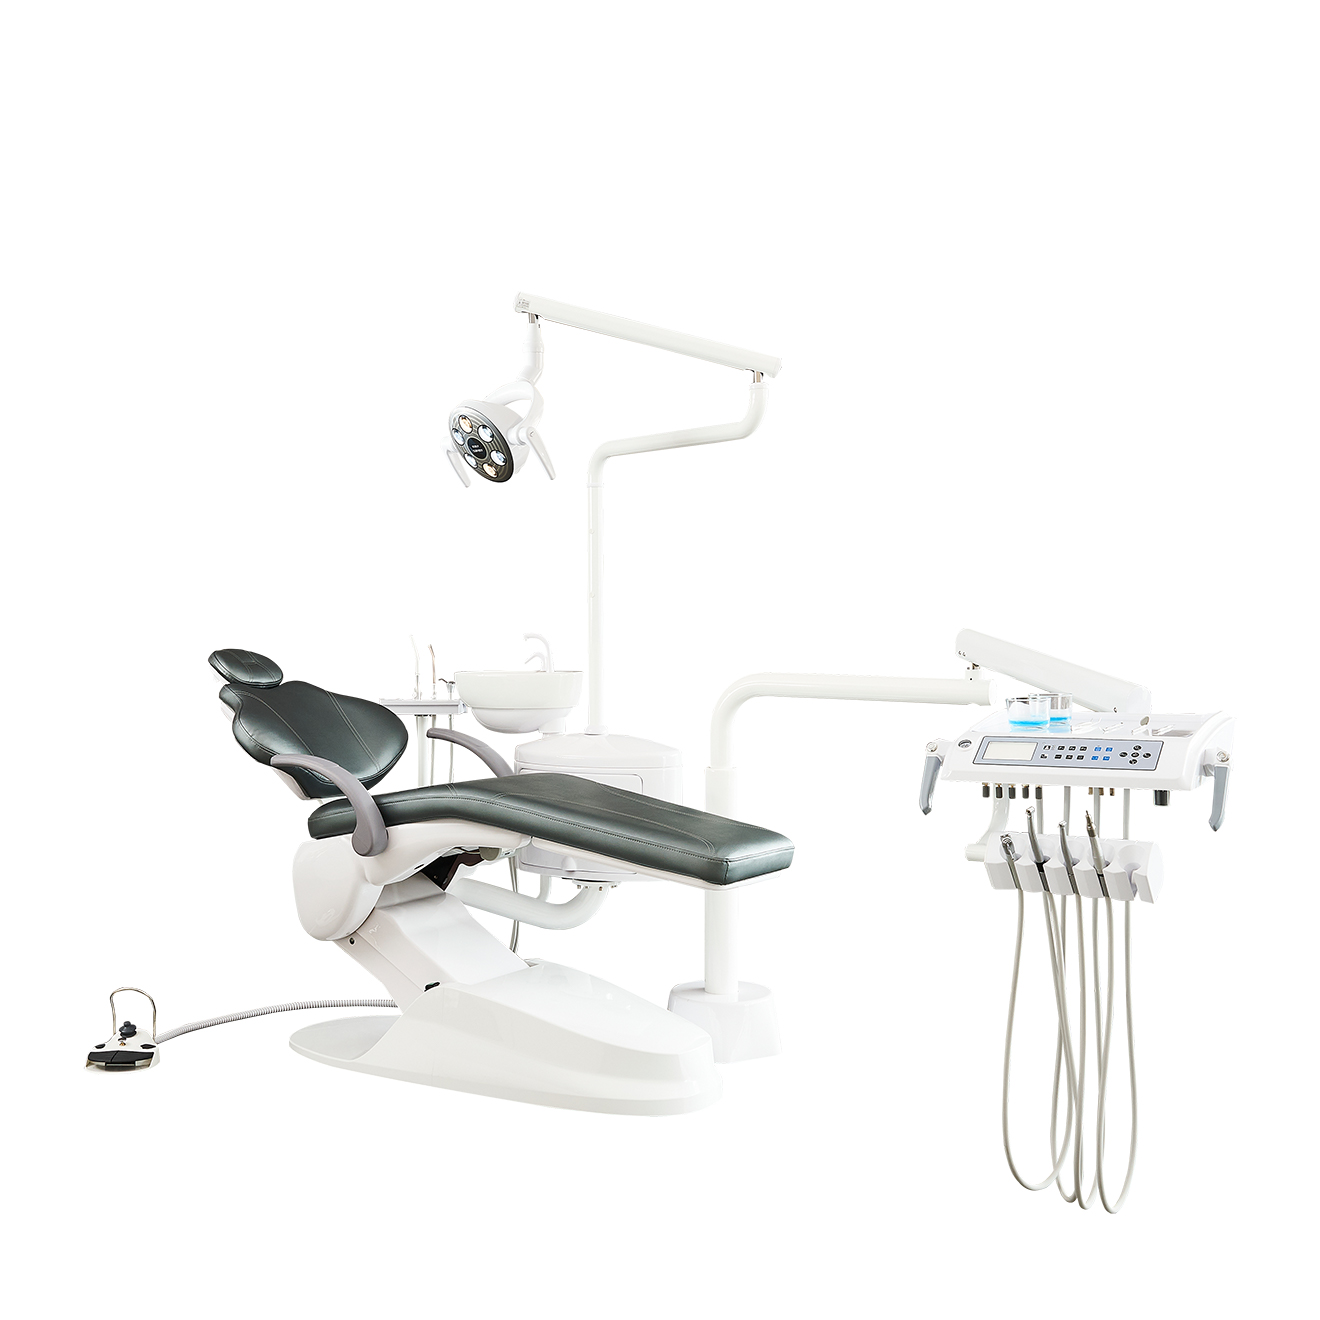 Choosing Dental Unit Suppliers for Optimal Patient Care